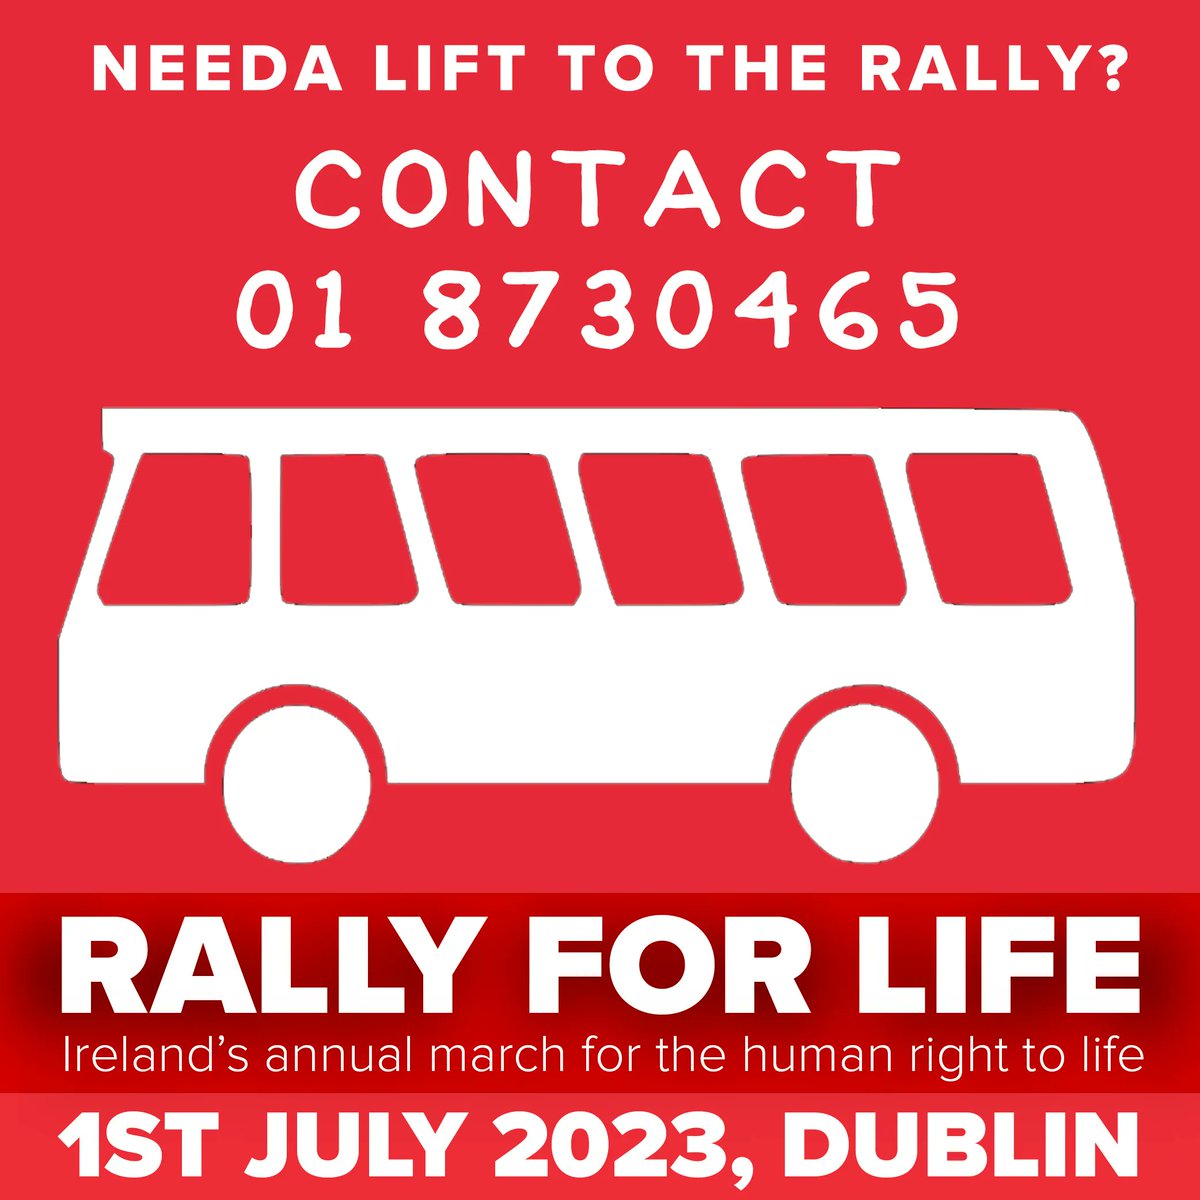 NEED A LIFT TO THE RALLY FOR LIFE?

Buses have been arranged to take people to the Rally for Life, so if you are looking to attend the Rally, please don't hesistate to get in touch. Contact us by emailing info@thelifeinstitute.net or call 01 8730465.

#RallyforLife #WhyWeMarch